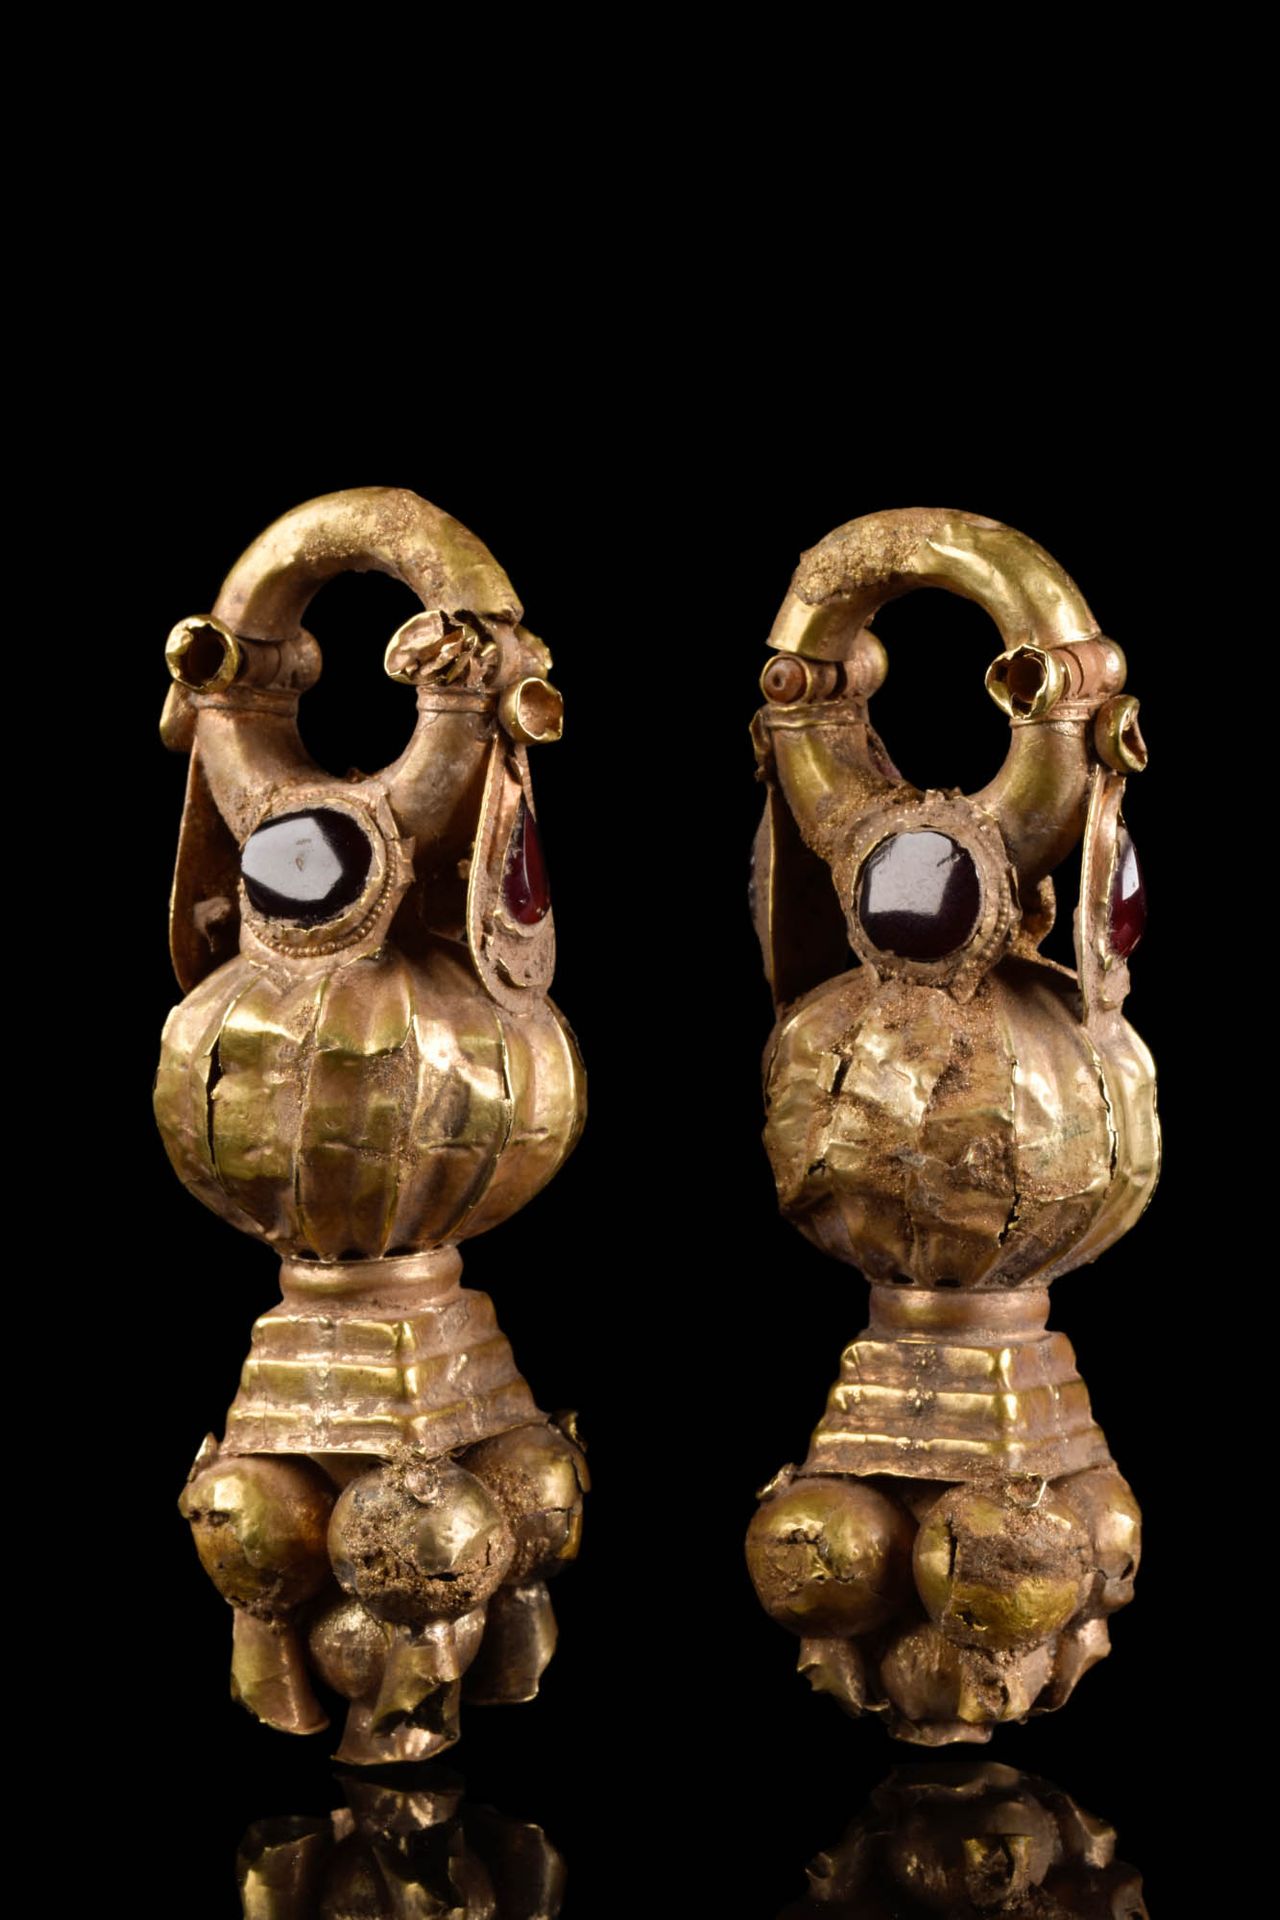 HELLENISTIC MATCHED PAIR OF GOLD EARRINGS Ca. 400 - 300 AV.
Paire de boucles d'o&hellip;